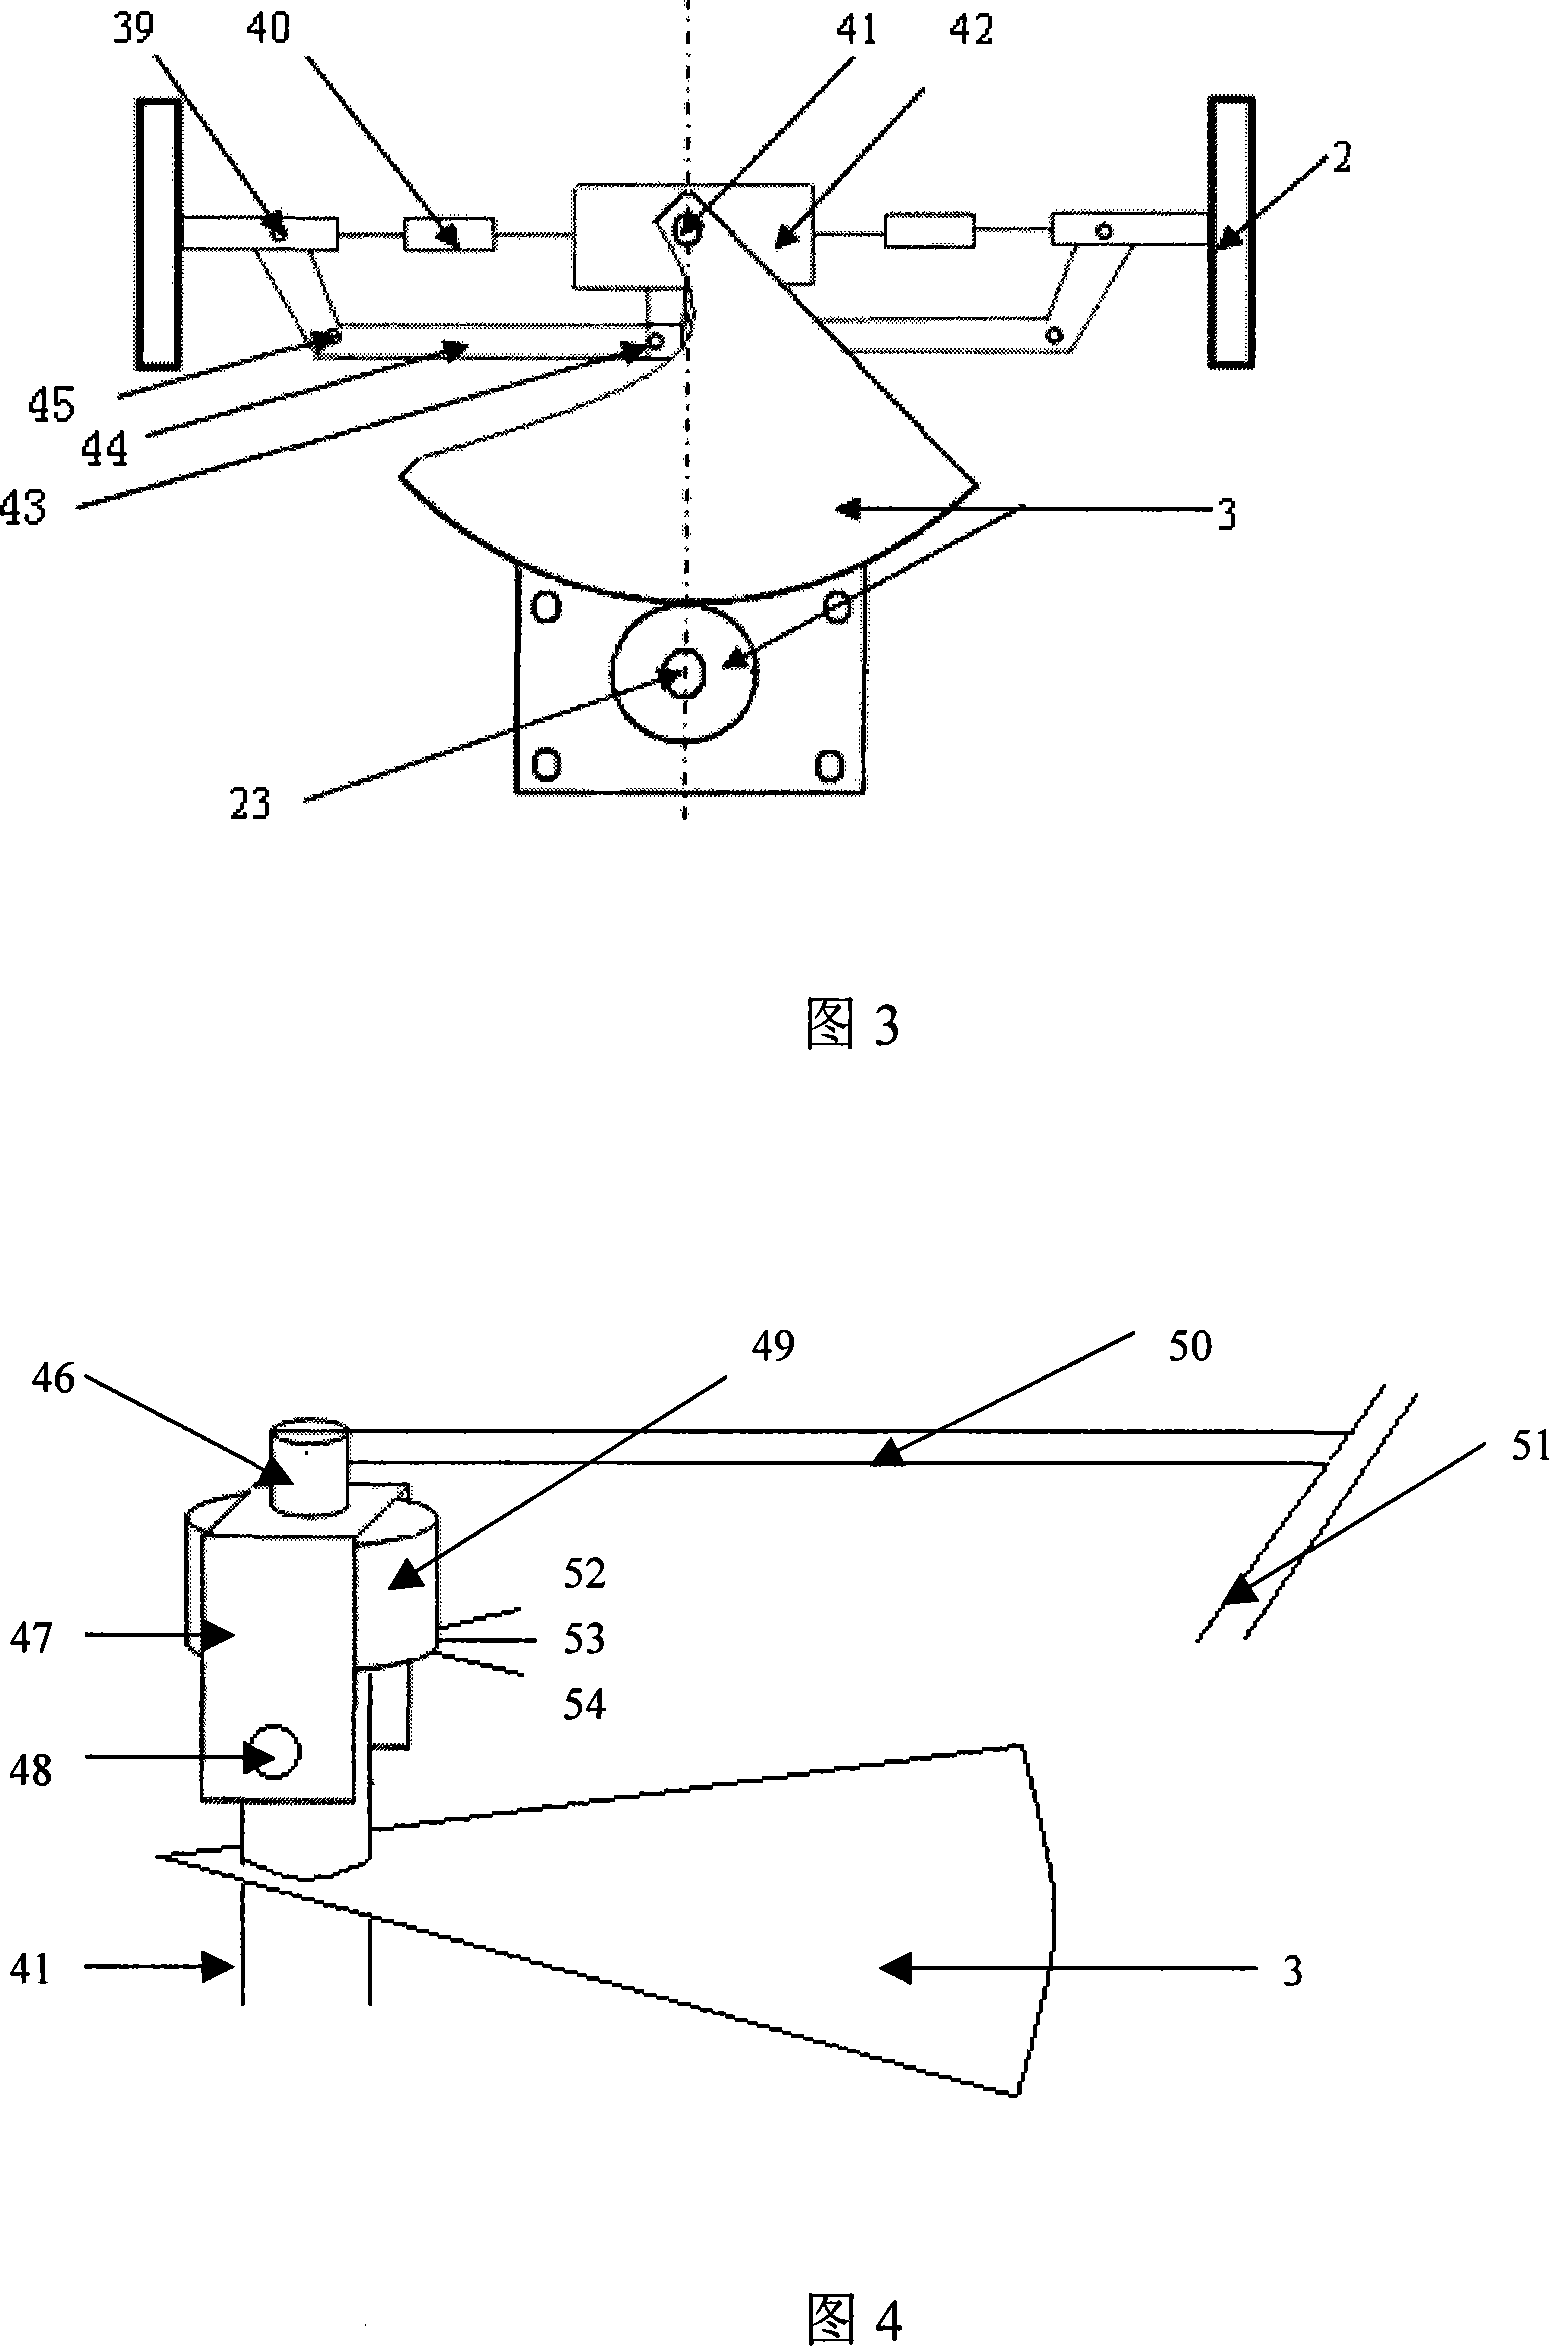 Automatic guidance system based on radio frequency identification tag and vision and method thereof